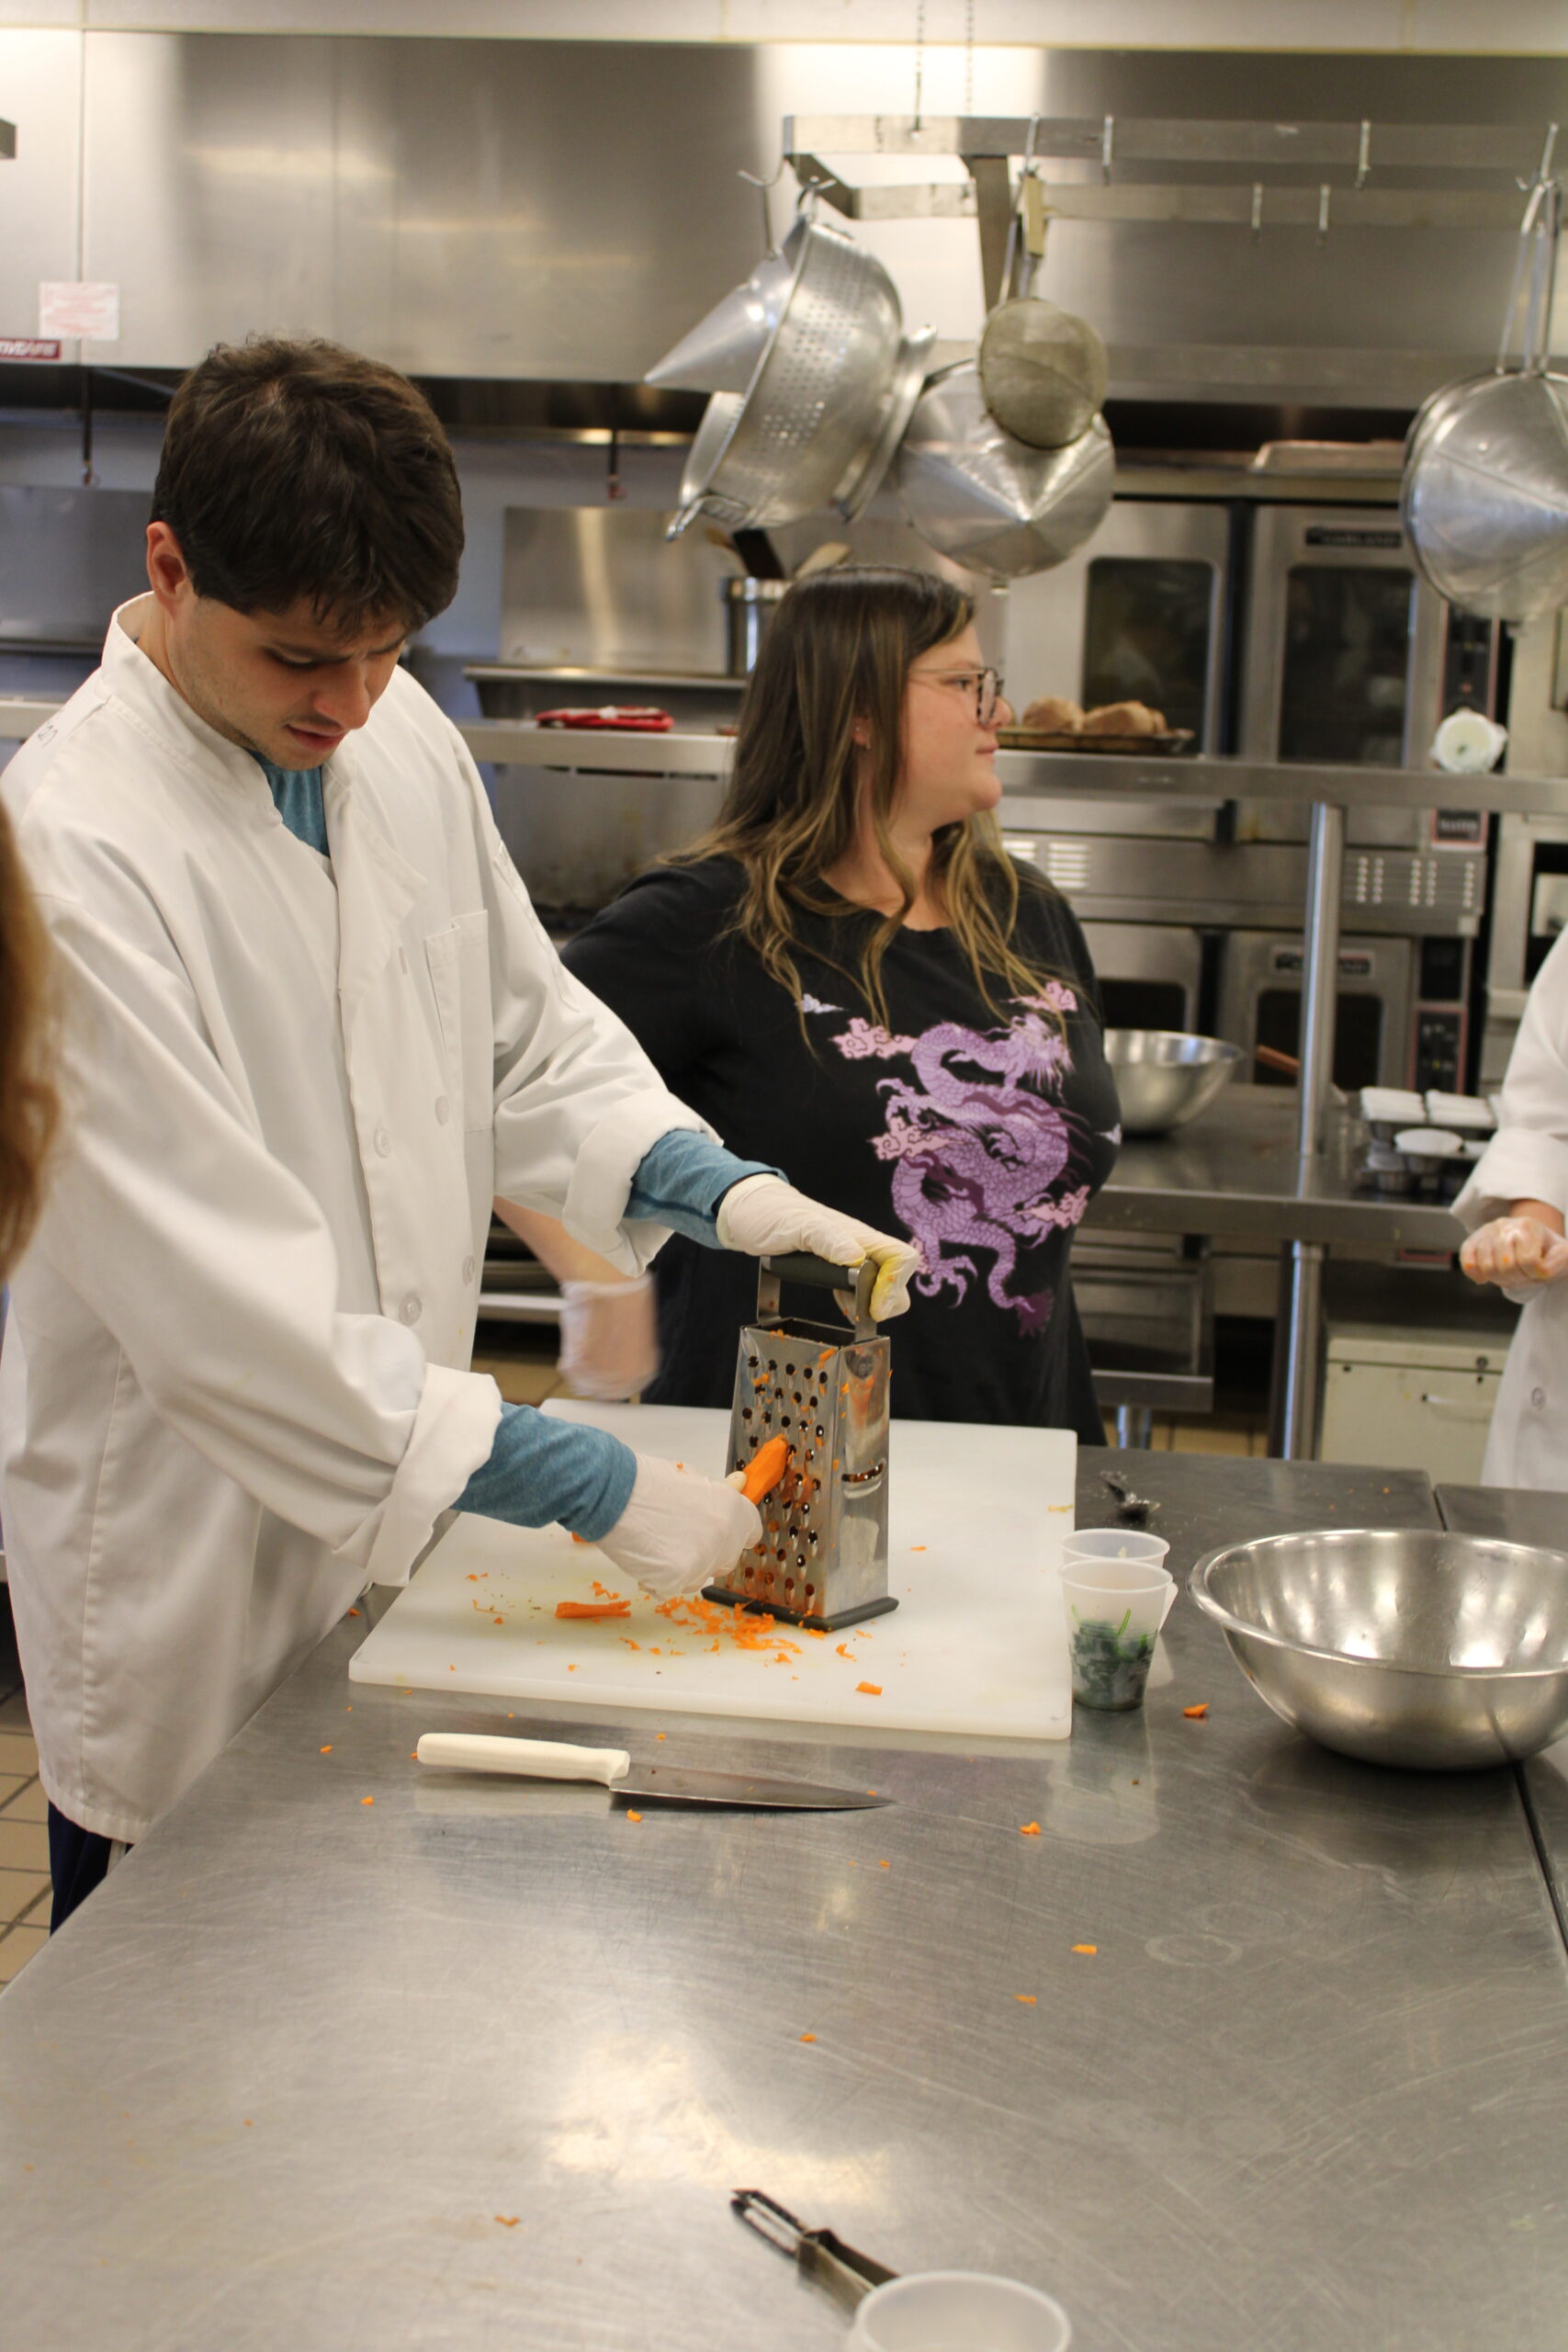 Christian Ciardiello grates carrots for a stuffed sweet potato recipe. Every Wednesday, the group meets to learn about kitchen safety, food handling and how to cook.  ELIZABETH VESPE